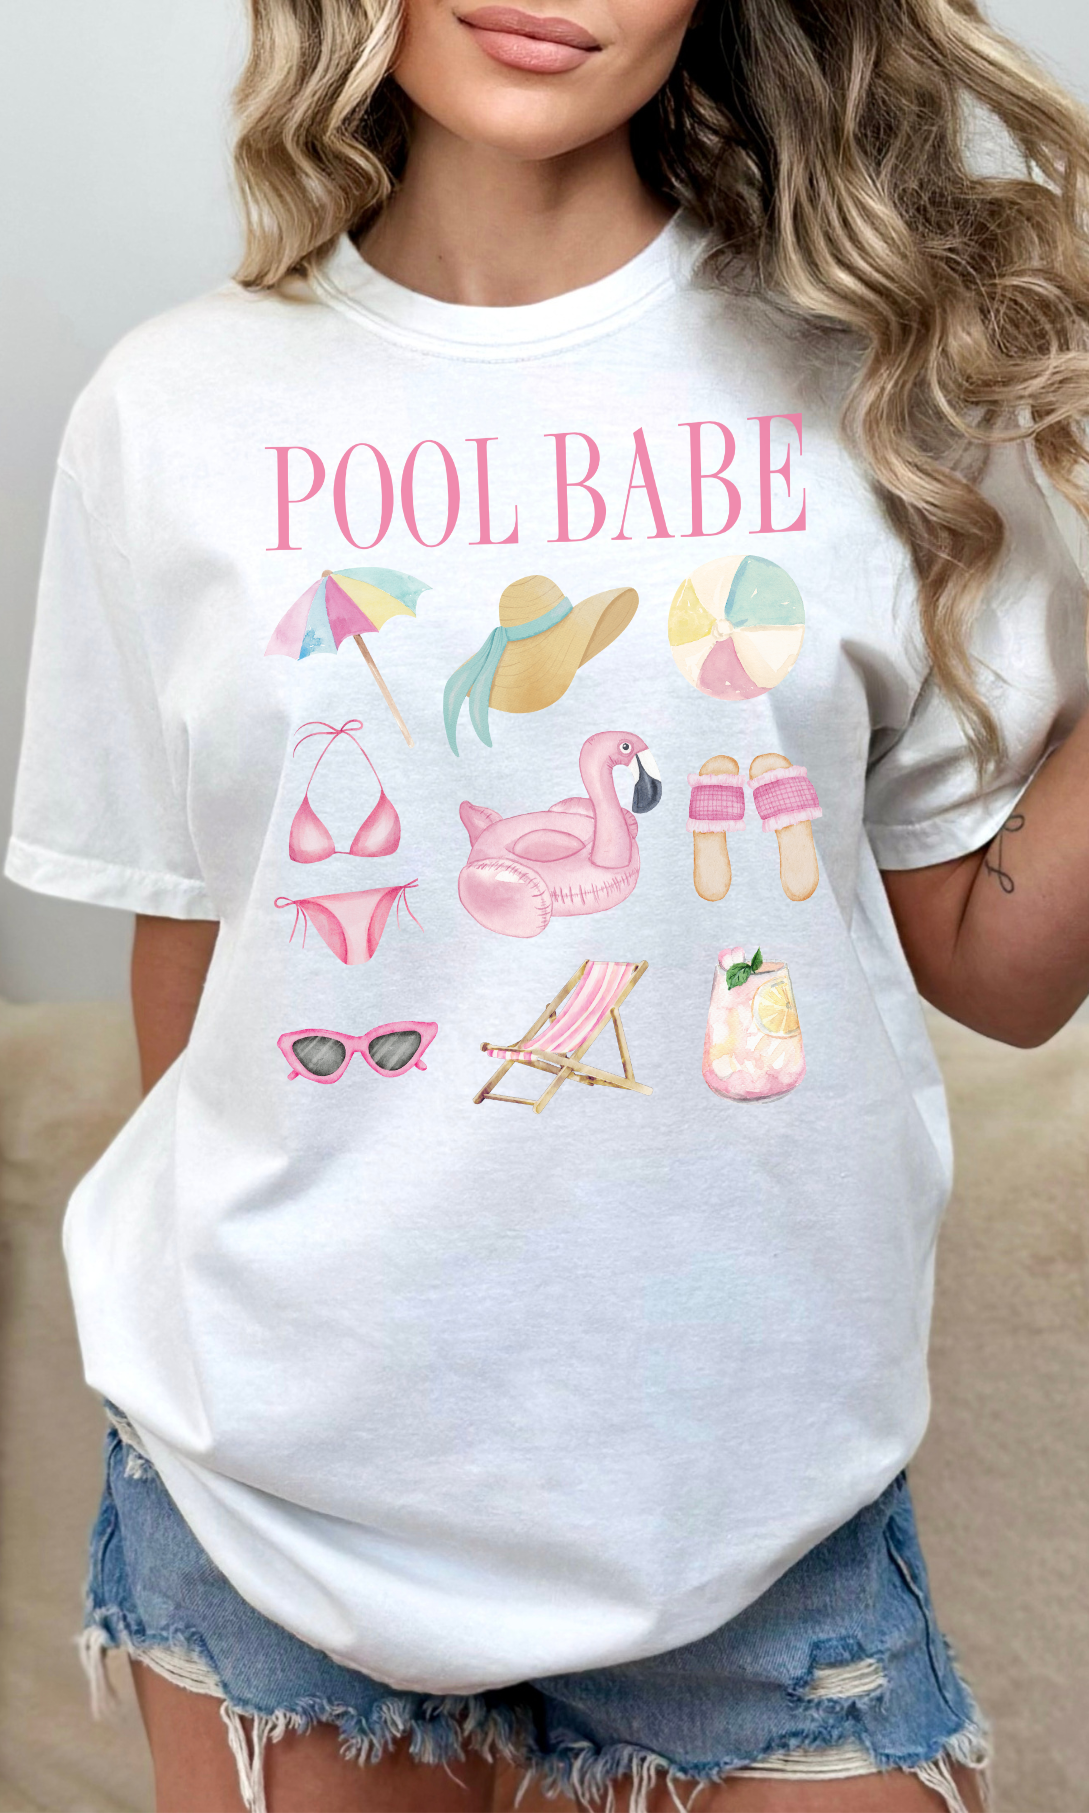 Pool Babe Garment Dyed Graphic Tee